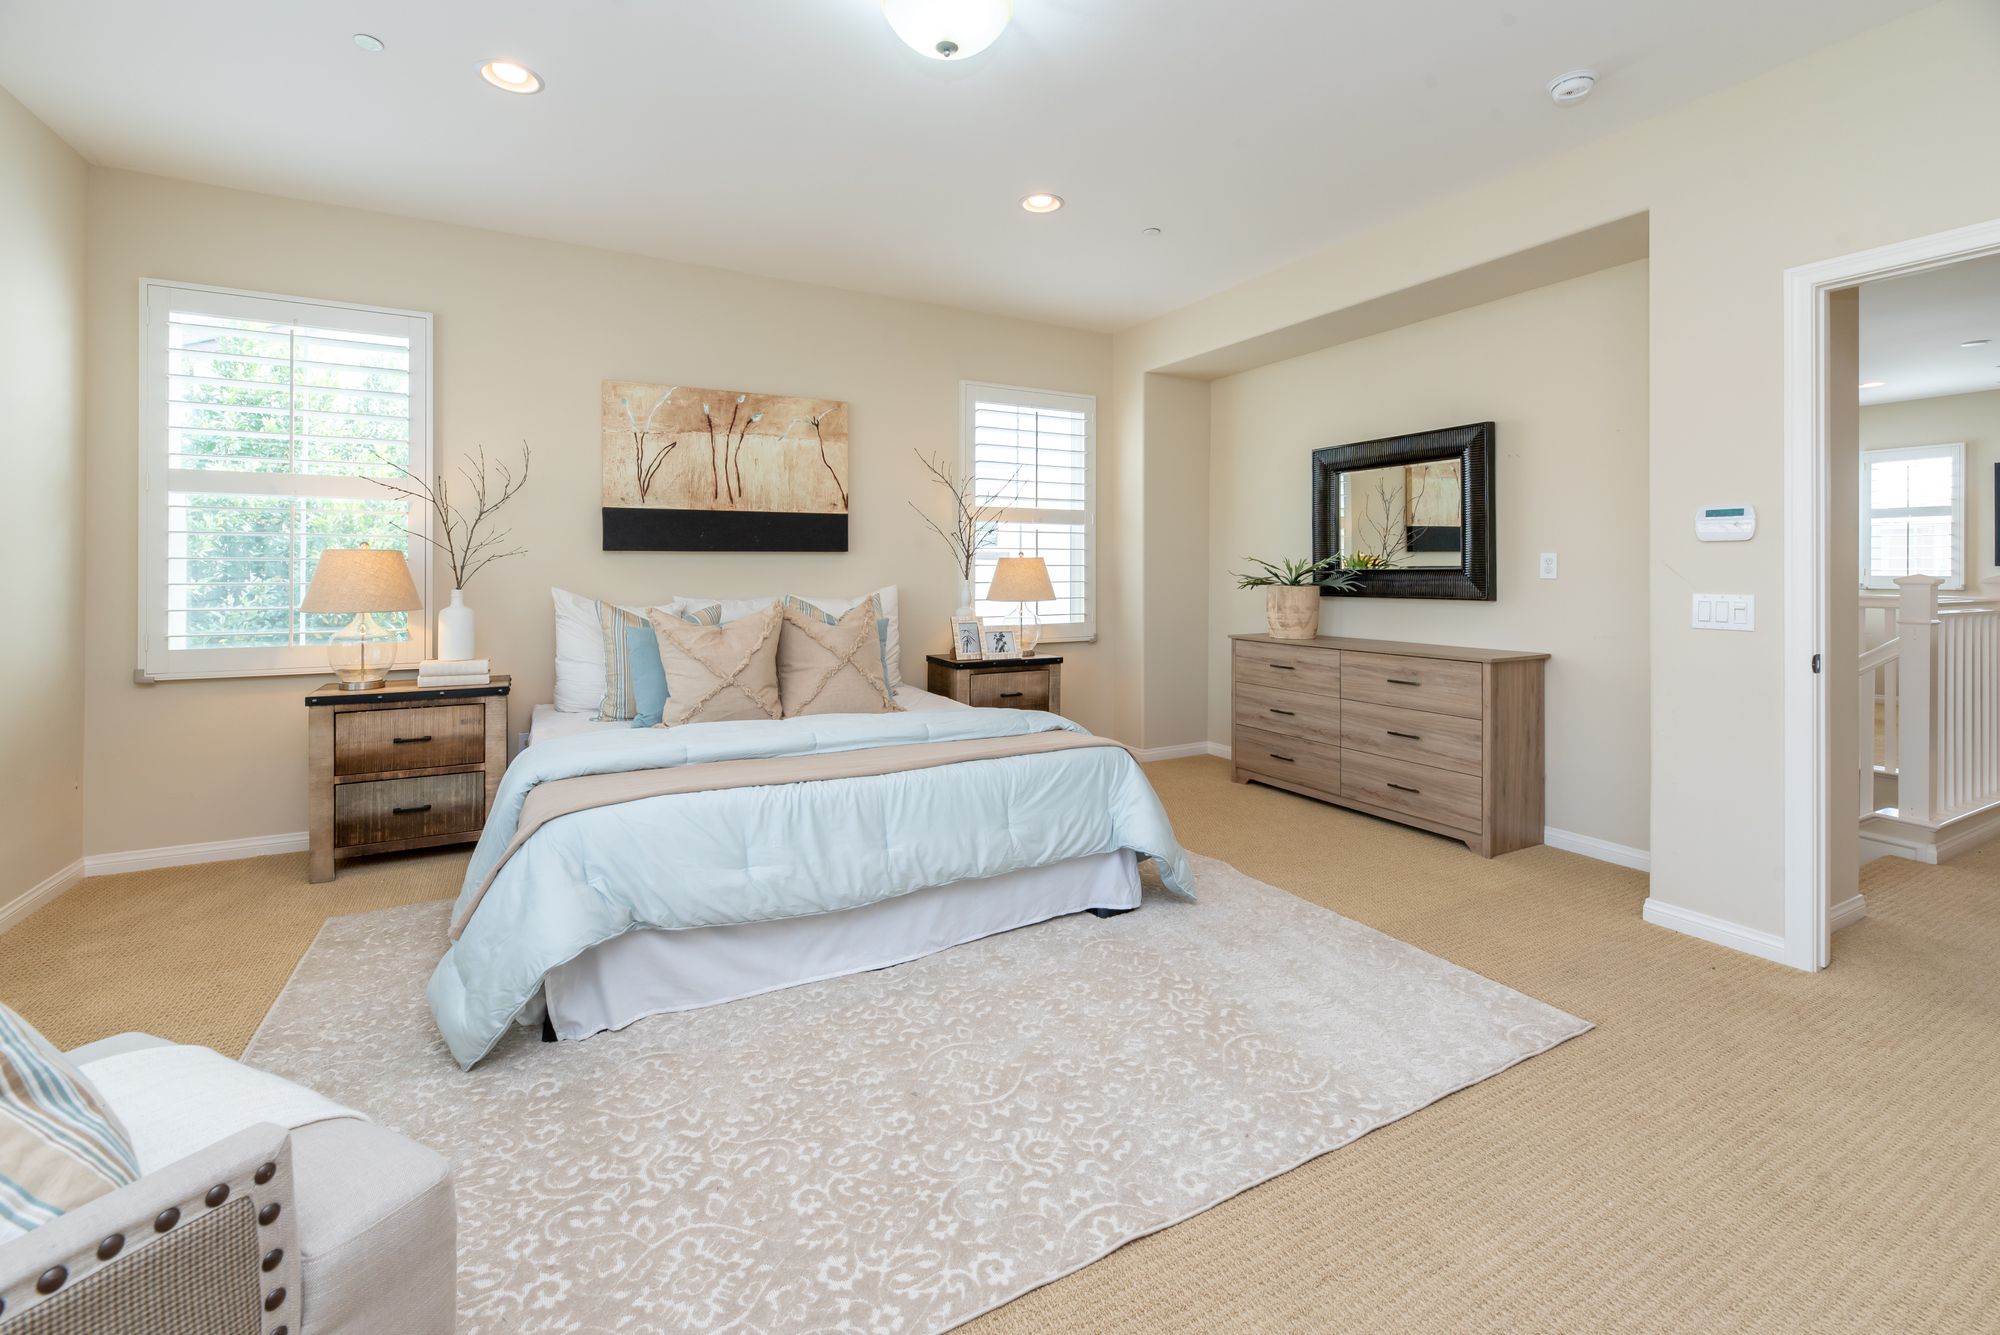 What is the best master room size?